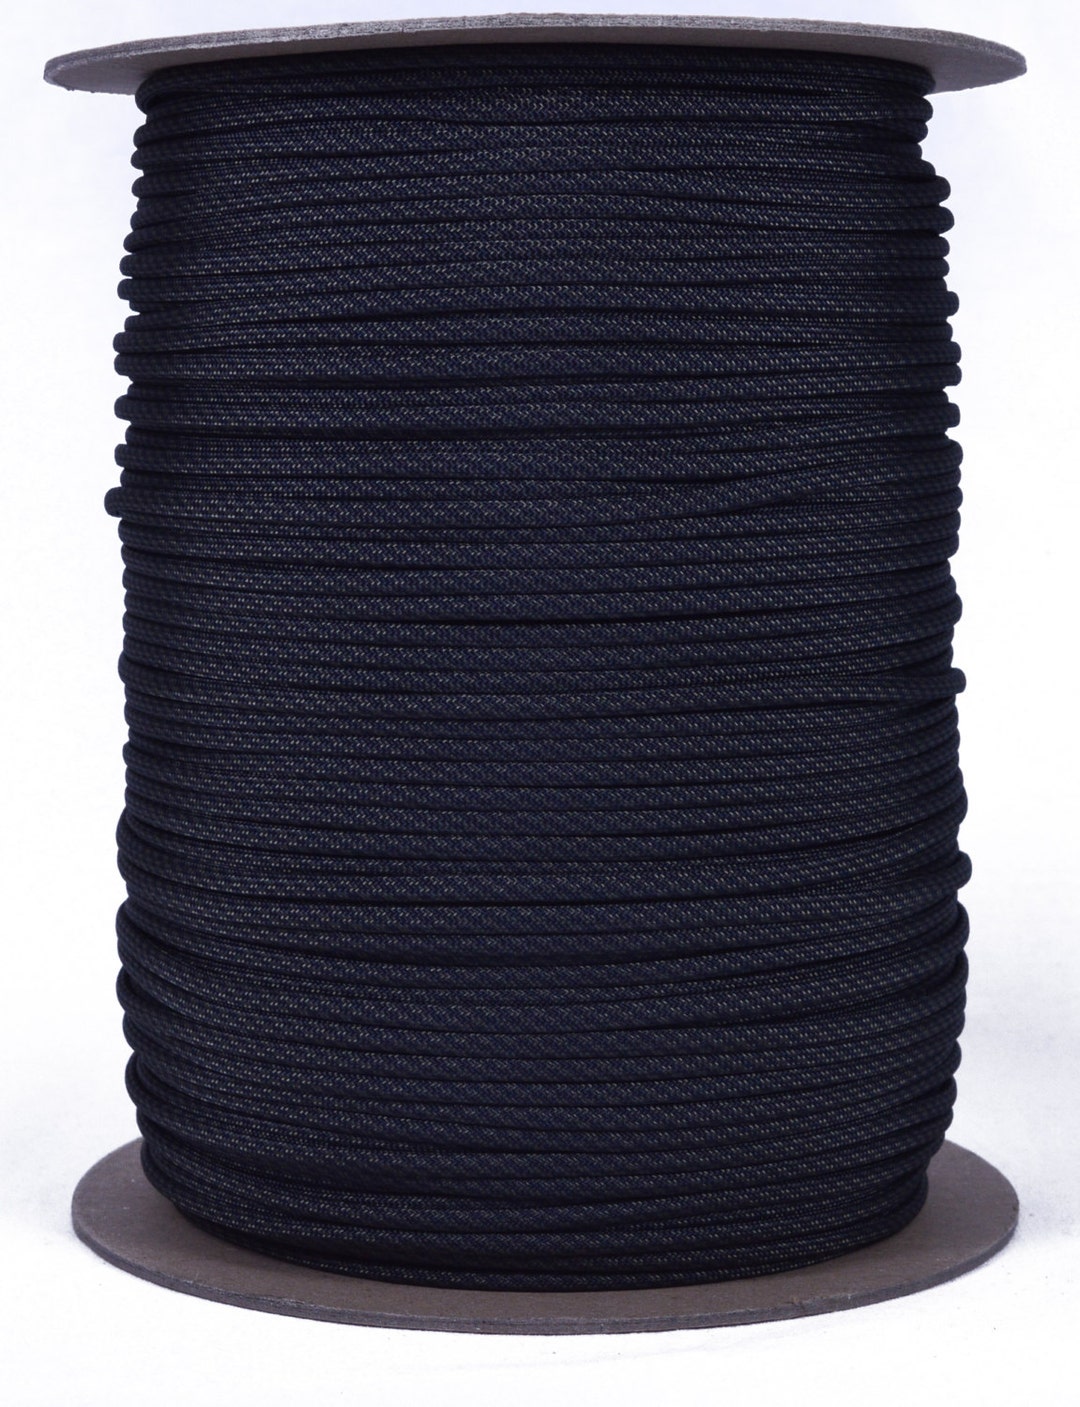 Comanche 1000 Foot Spool 550 Paracord for Paracord Crafts - Etsy